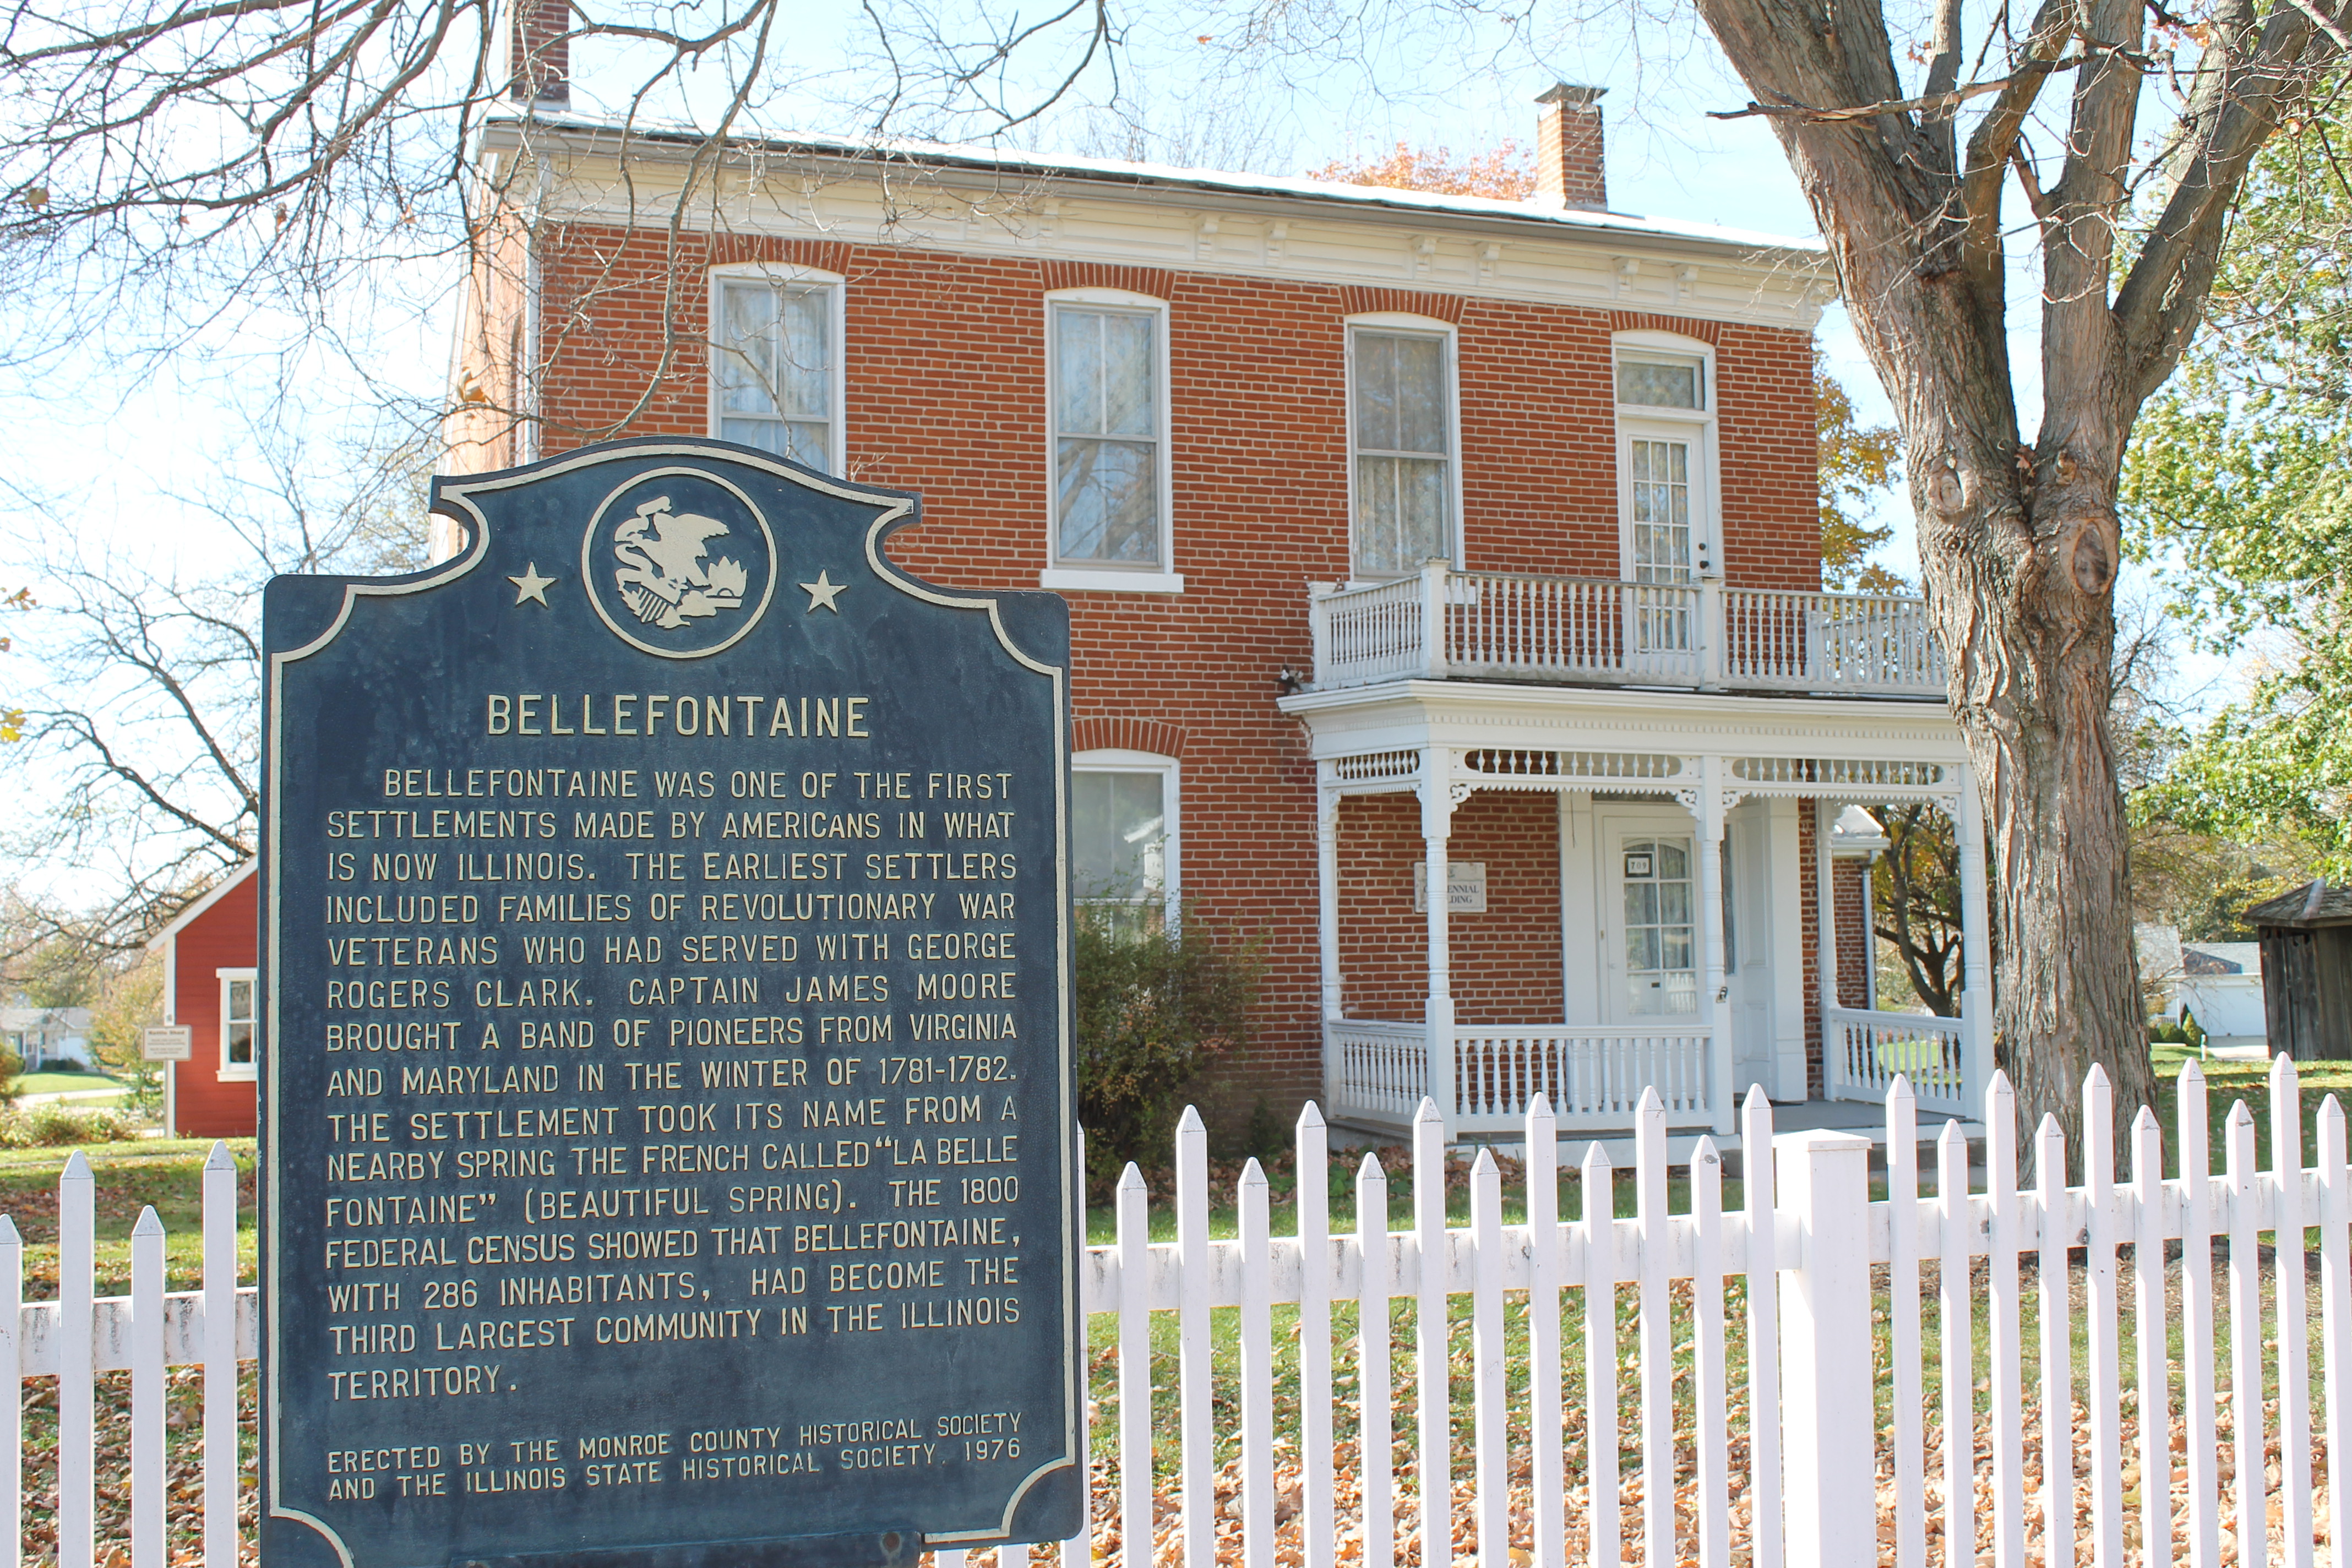 The Bellefontaine House is the site of Waterloo's original settlement and the first American settlement in the State of Illinois.